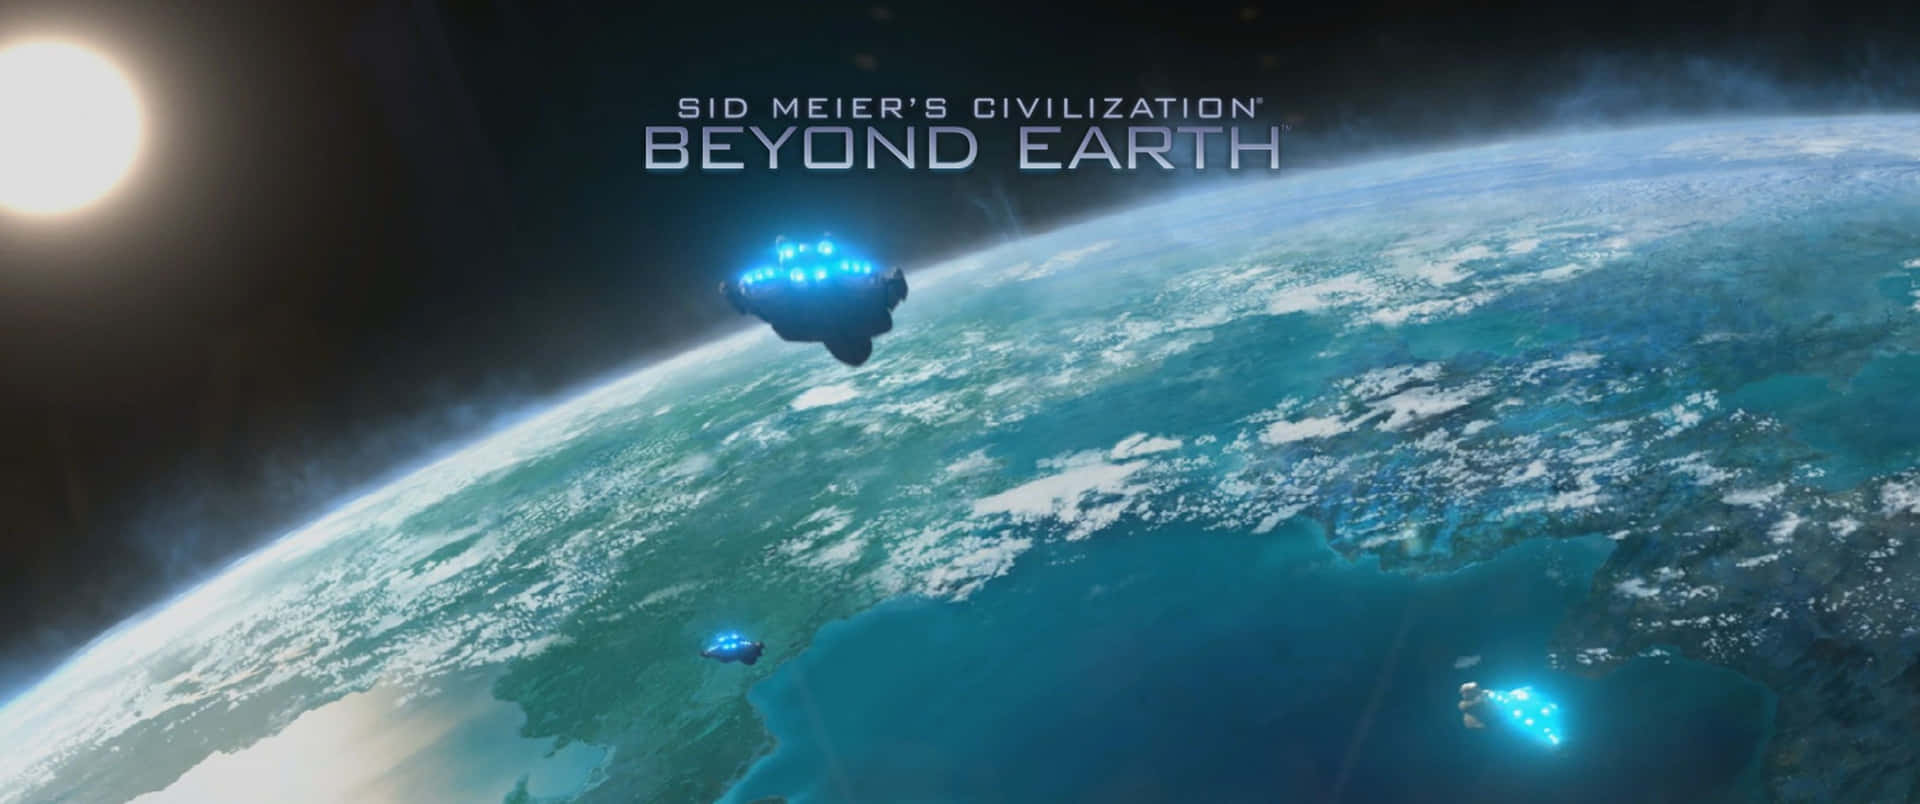 Outer Space 3440x1440p Civilization Beyond Earth Background